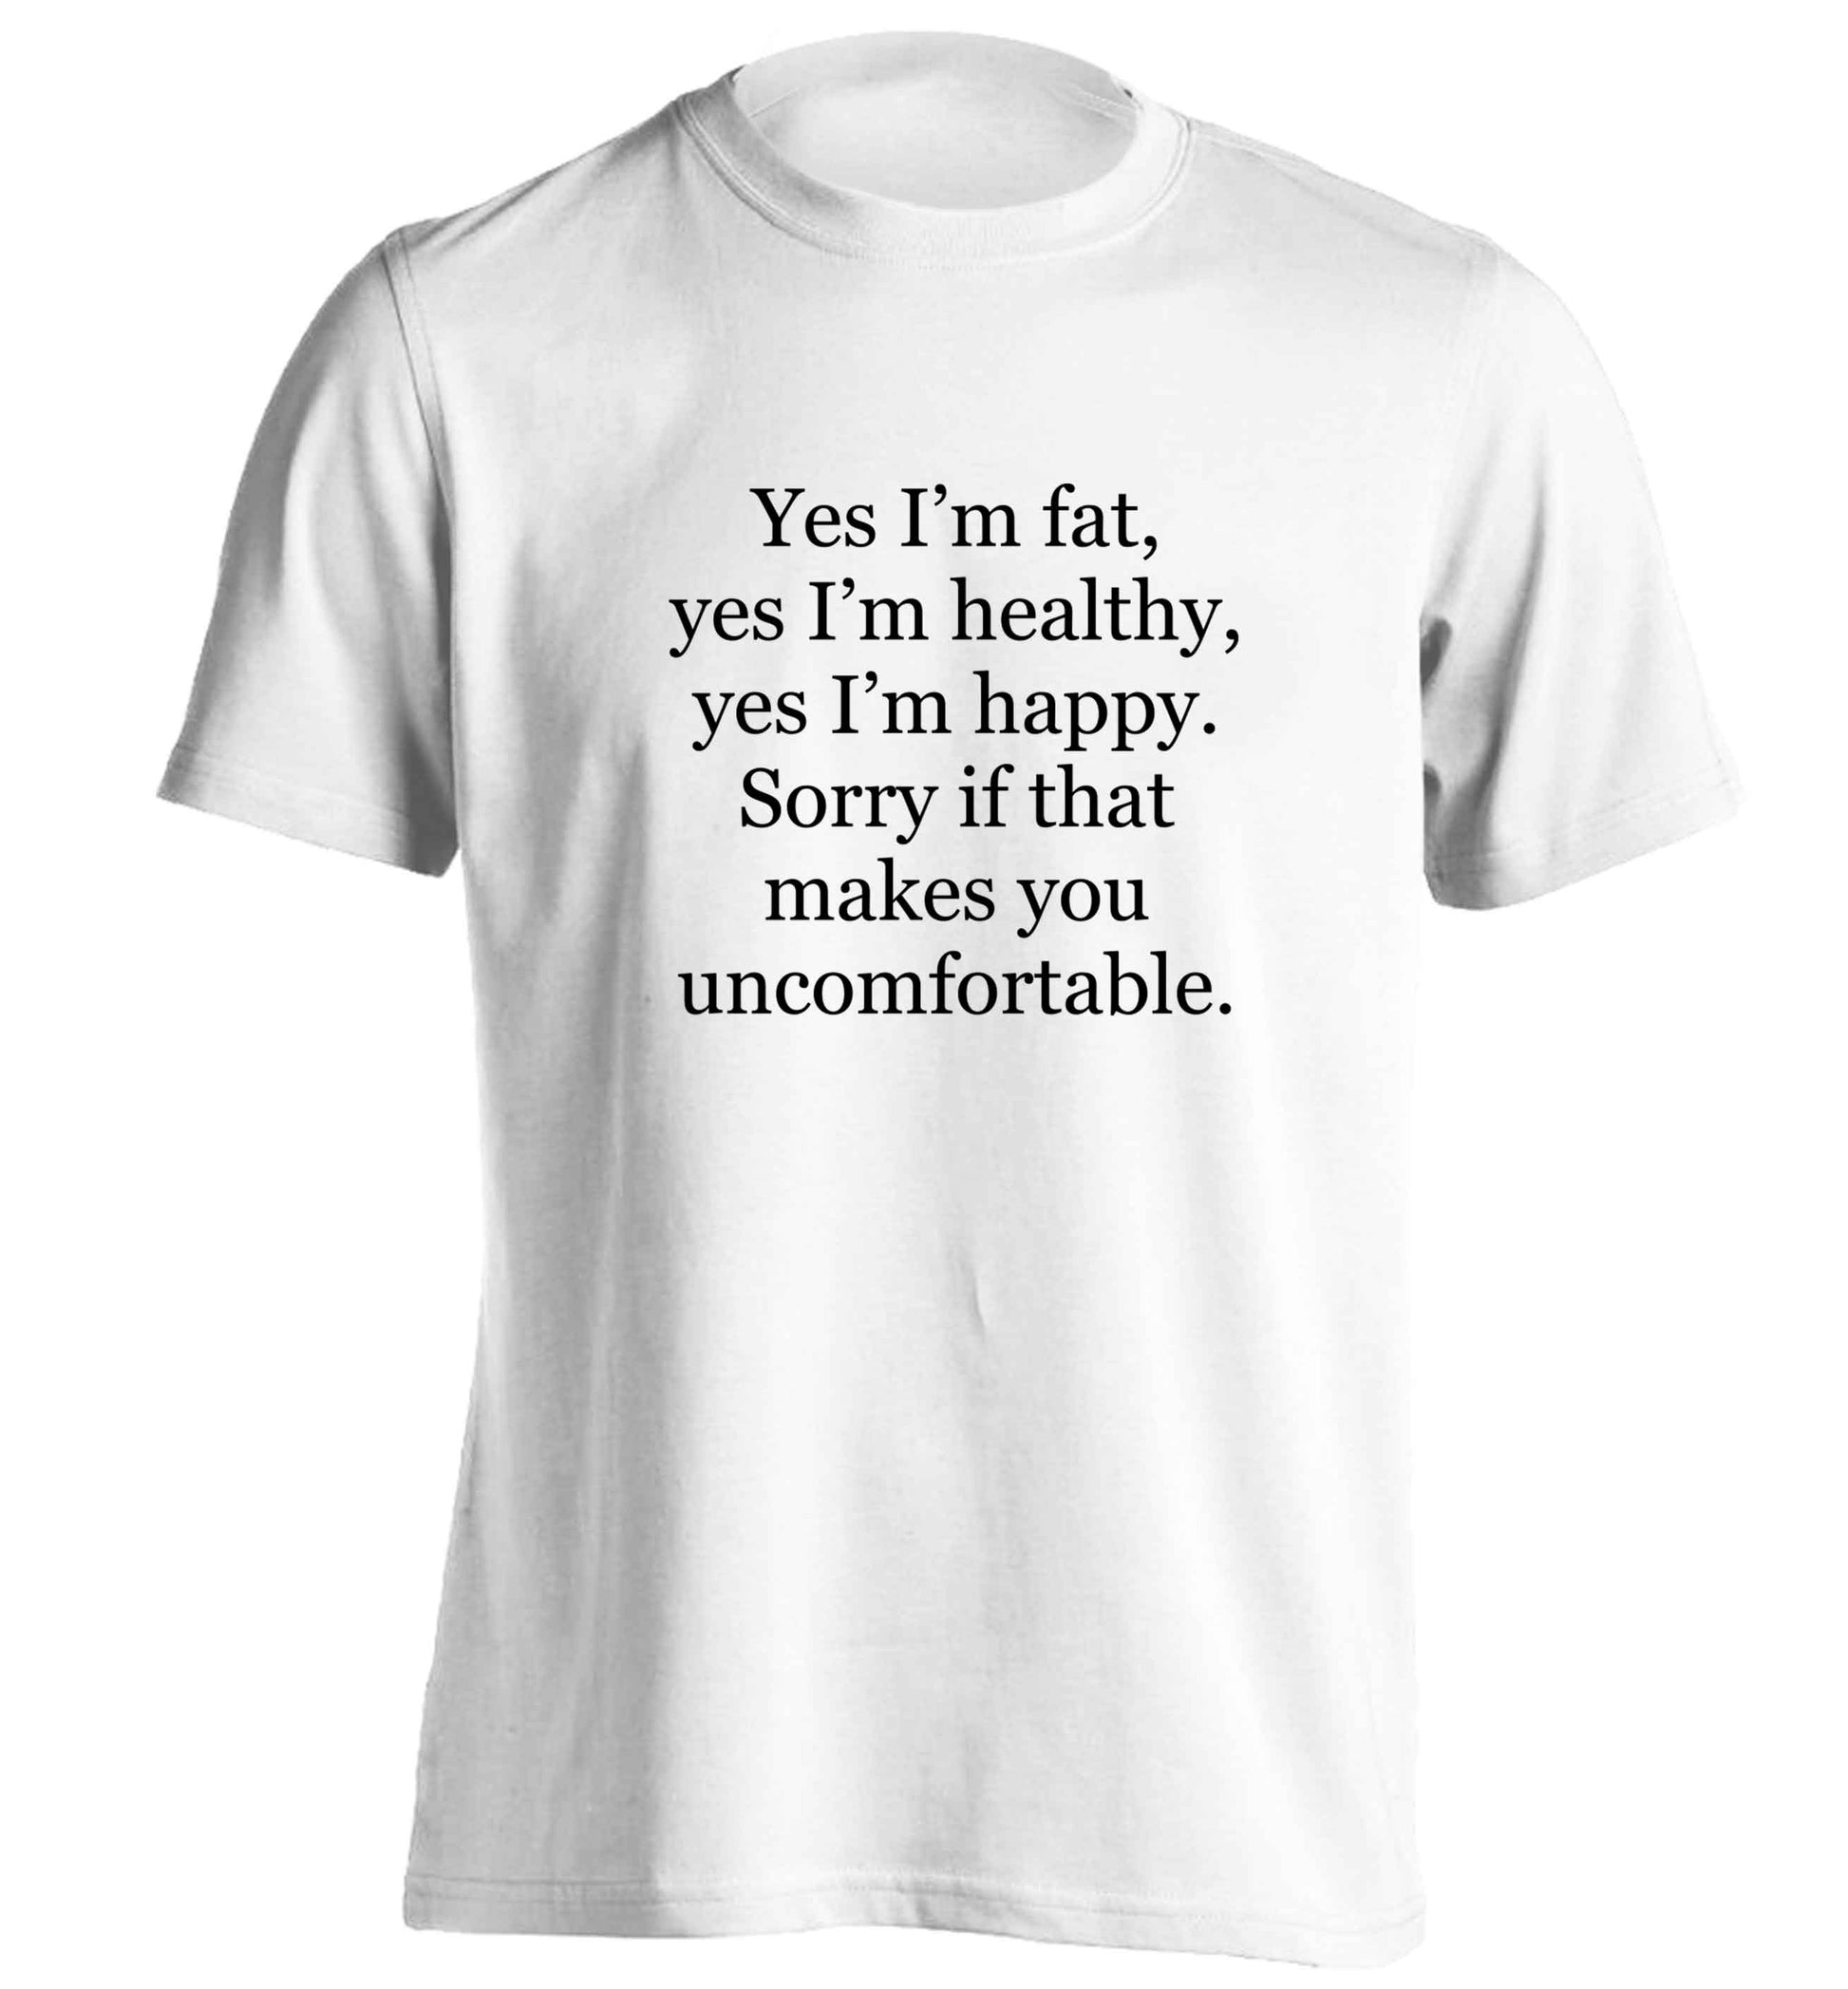 Yes I'm fat, yes I'm healthy, yes I'm happy. Sorry if that makes you uncomfortable adults unisex white Tshirt 2XL